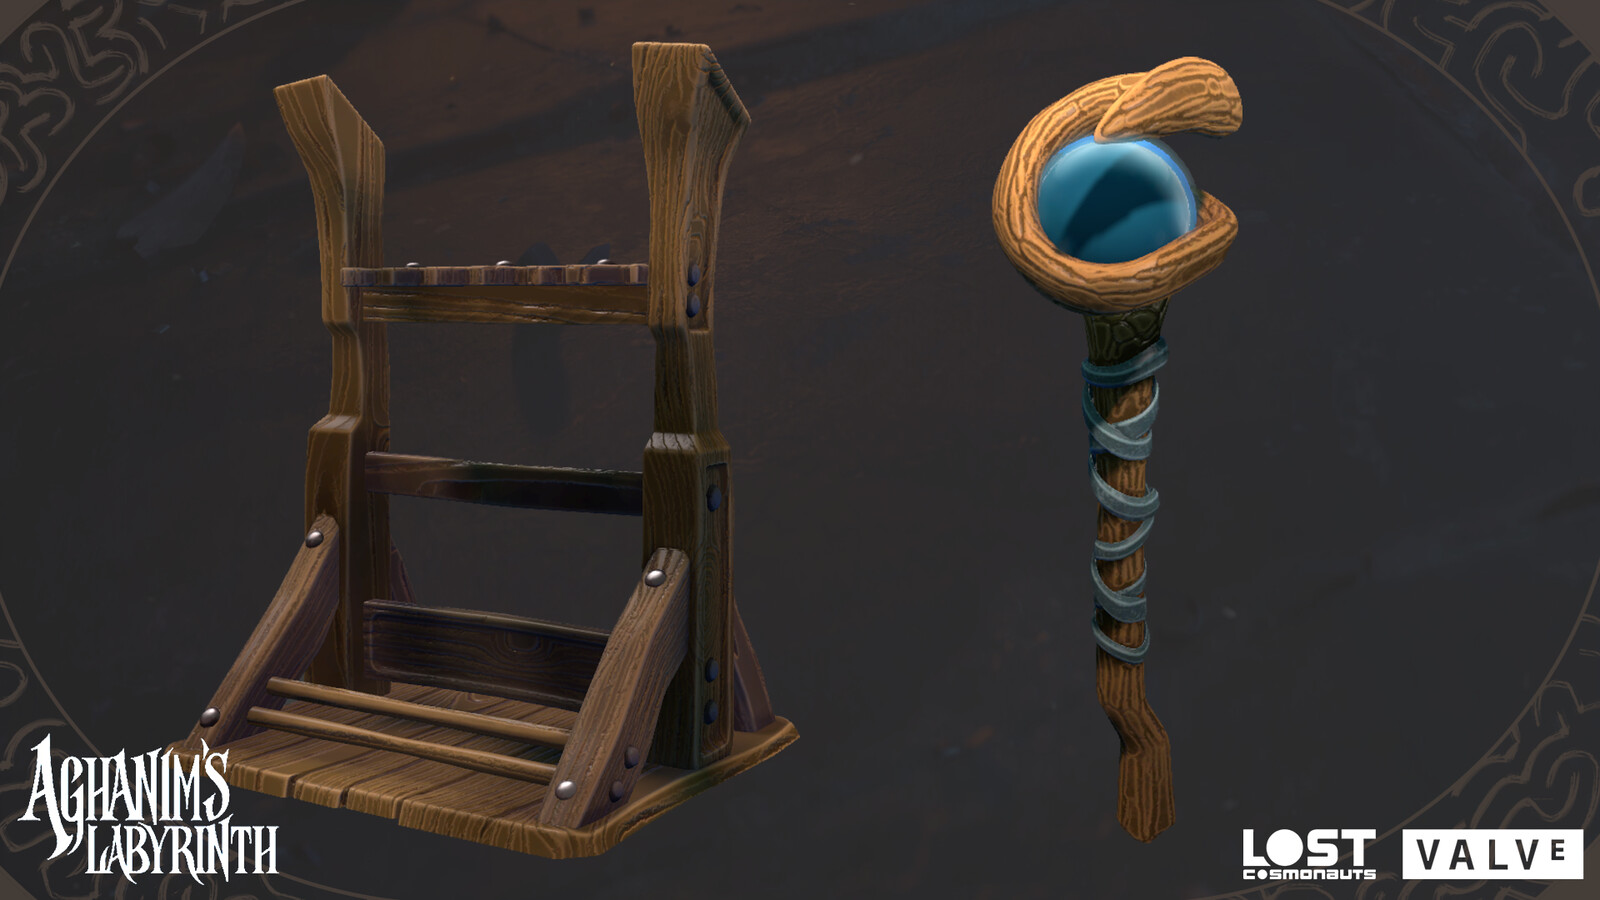 Recreations of a Dota 2 weapon rack asset and the Staff of Wizardry item.